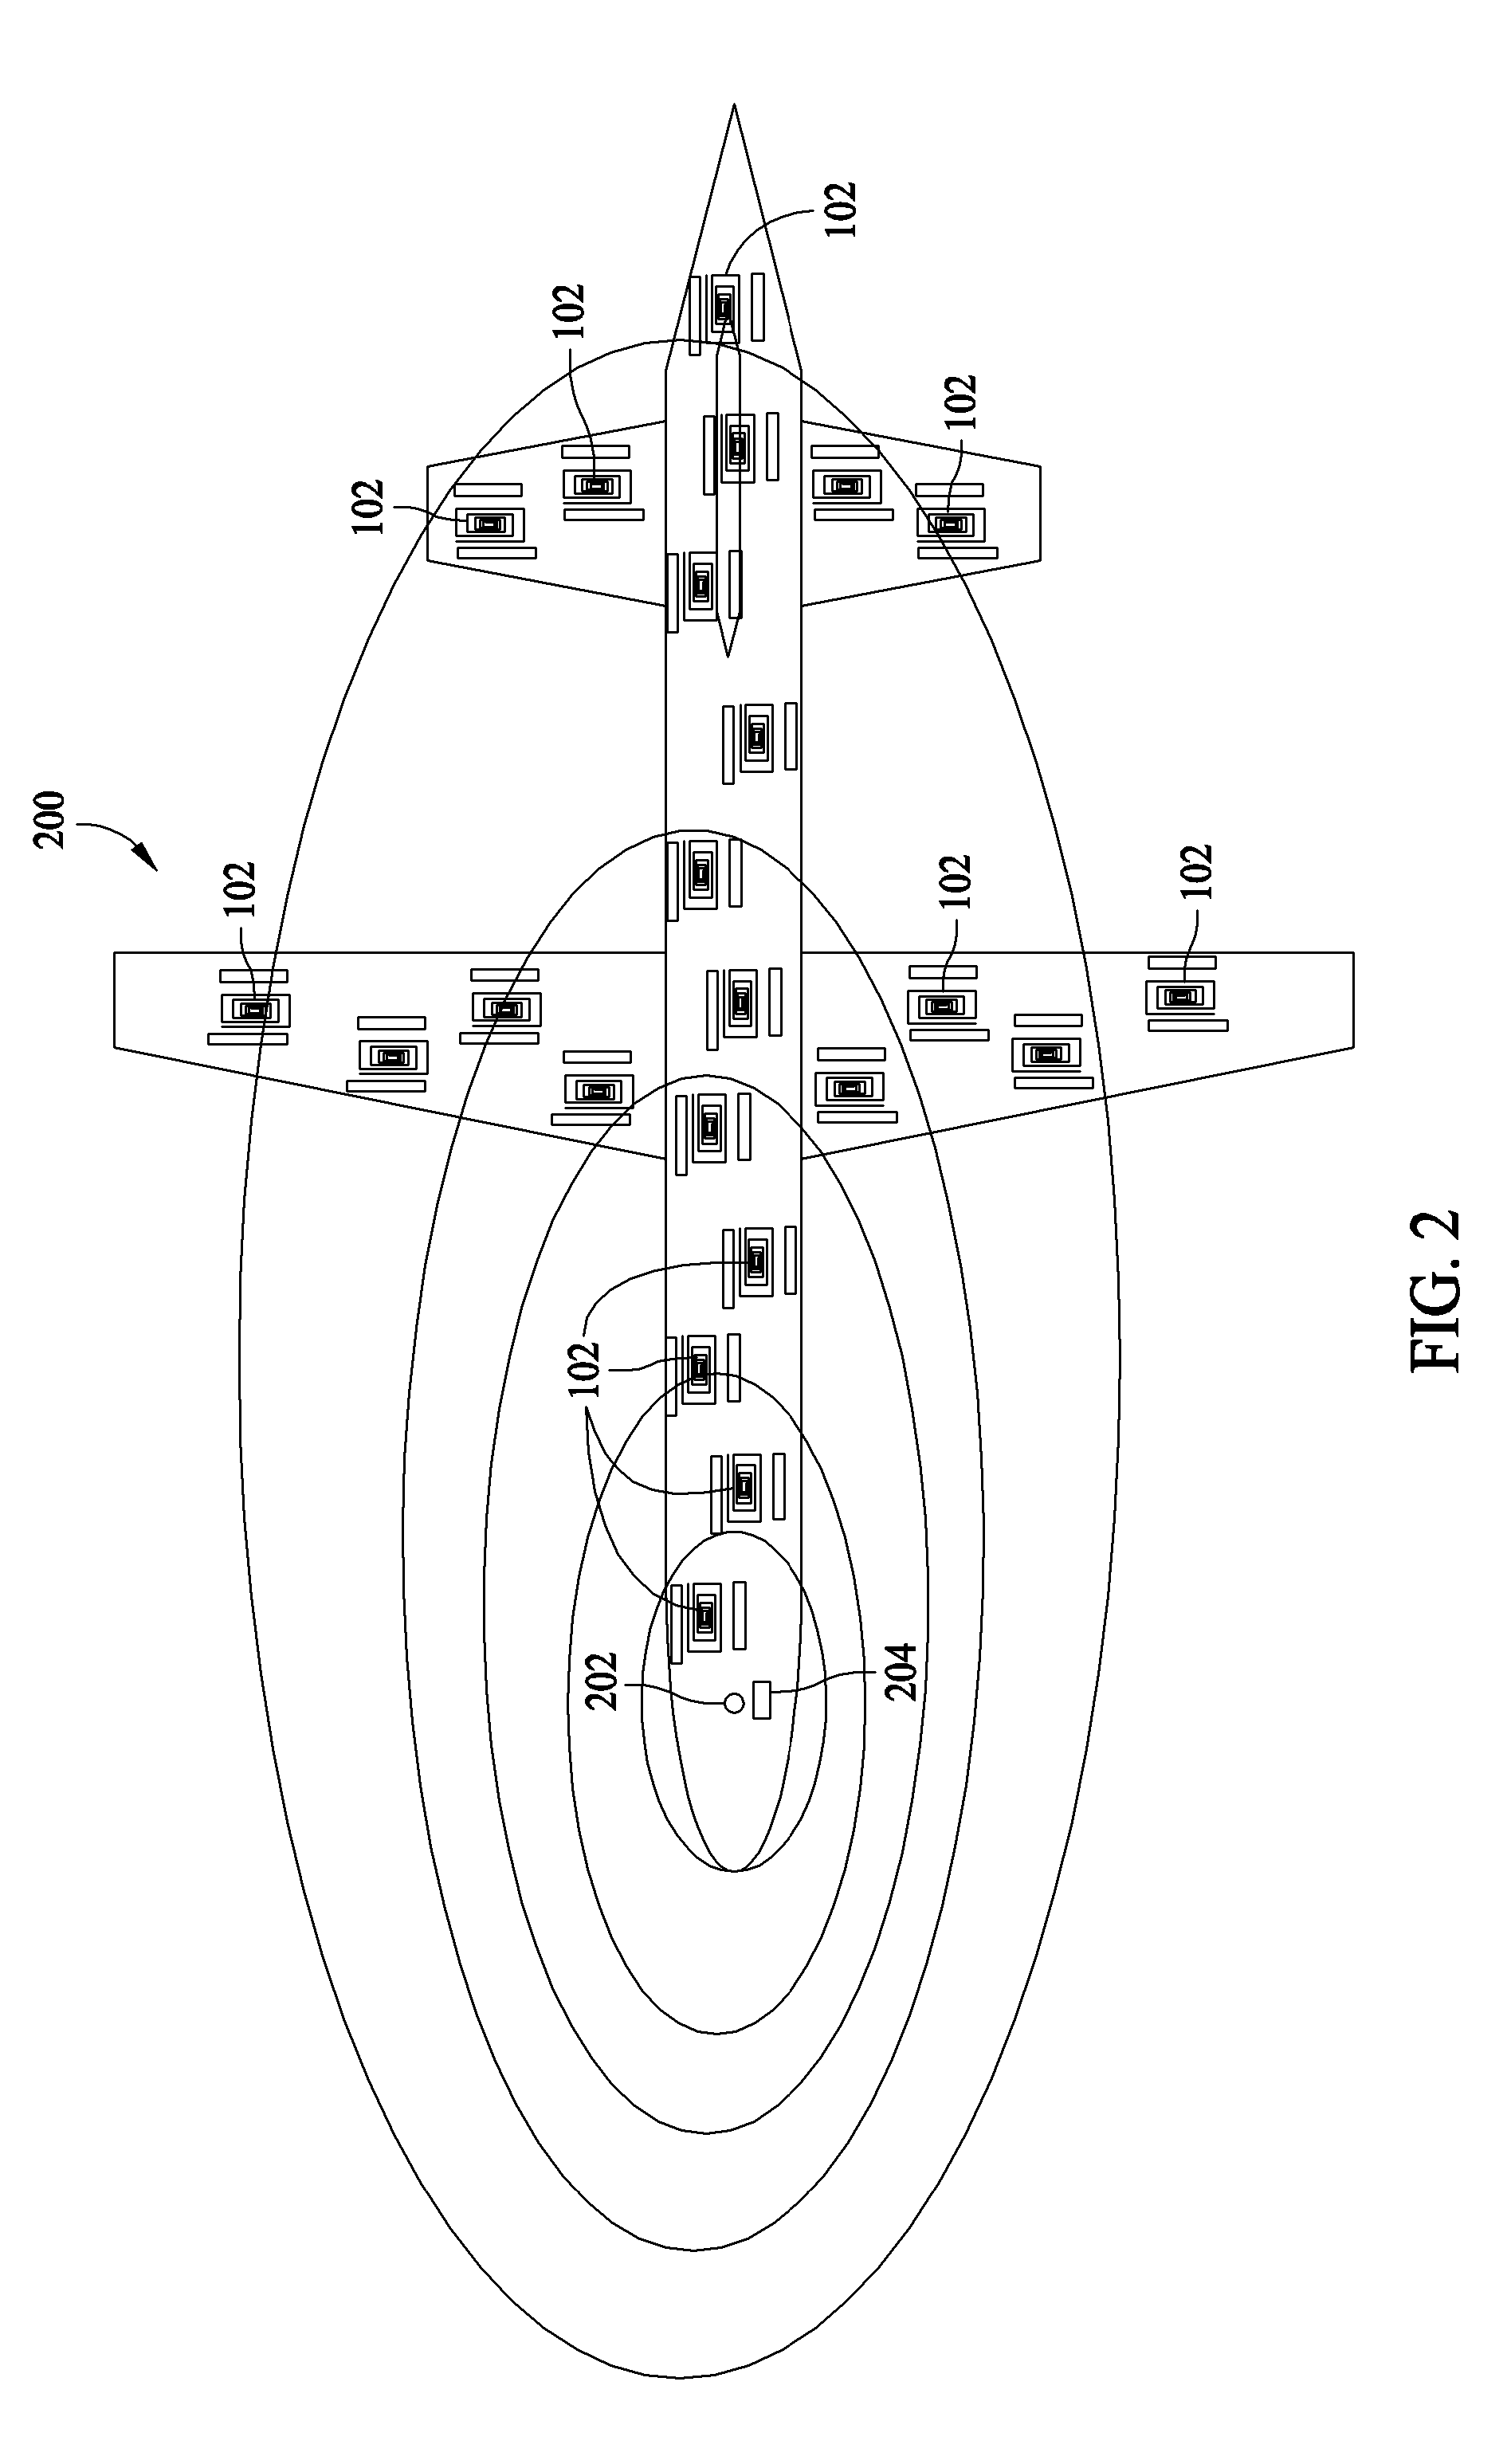 Methods and systems for monitoring structures and systems